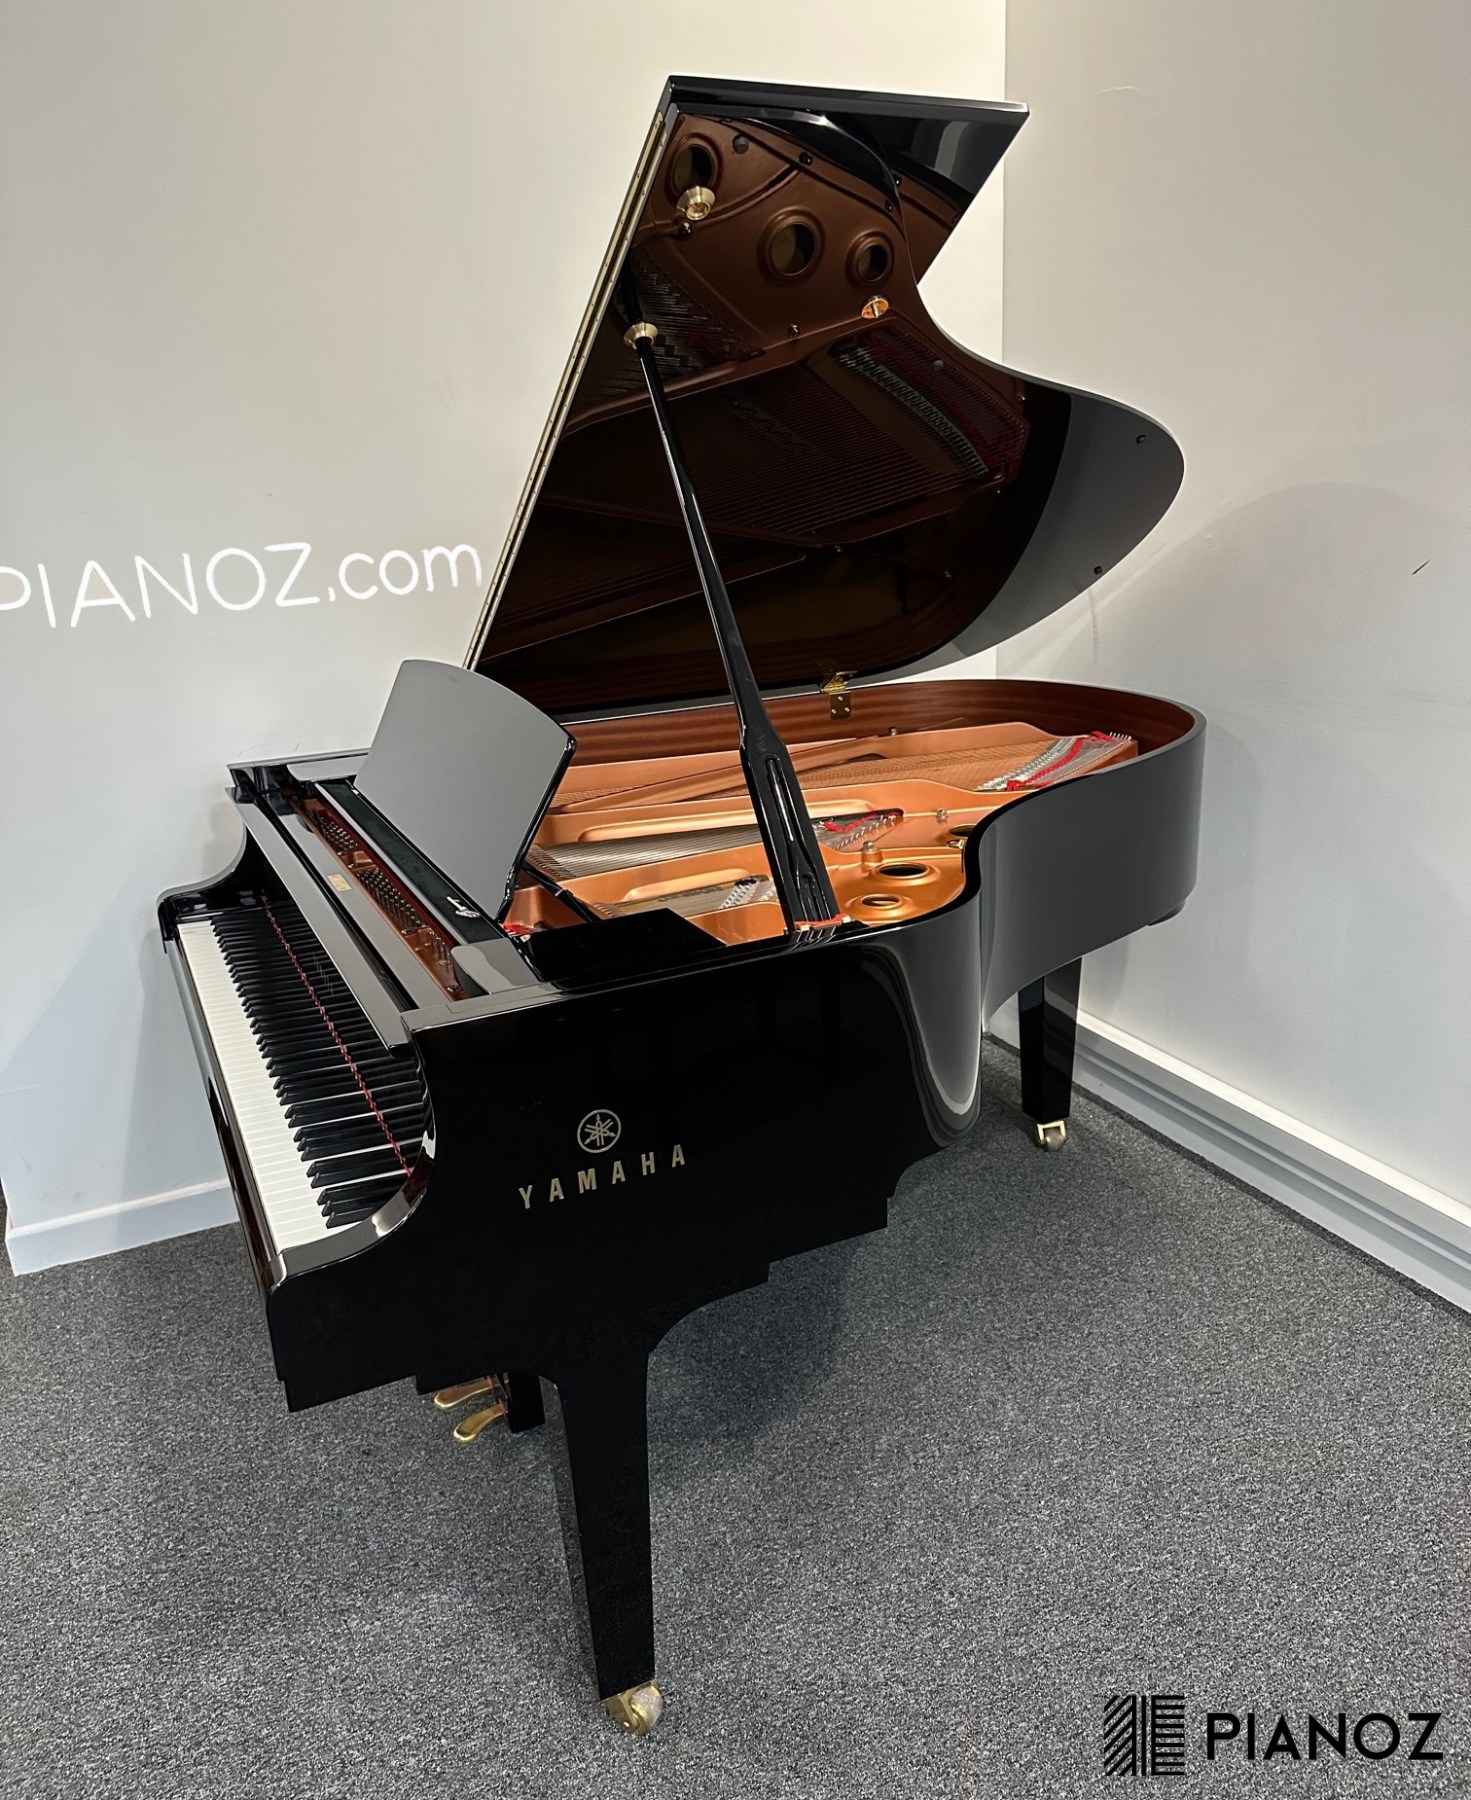 Yamaha C3X Adele World Tour Grand Piano piano for sale in UK